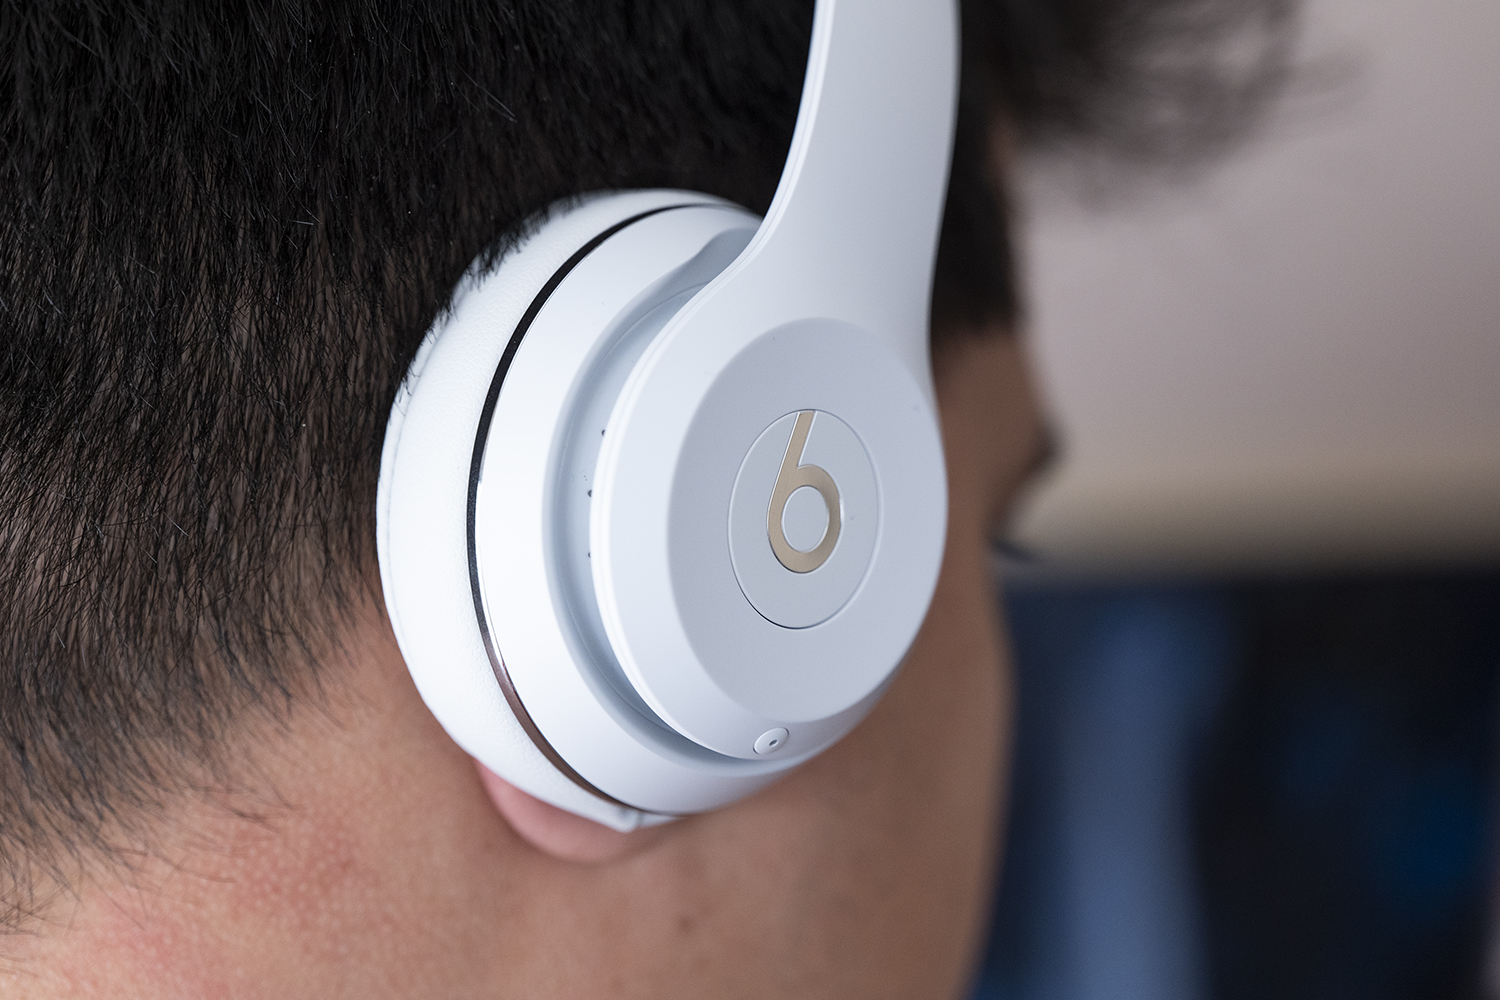 Beats Solo3 Headphones Review: Style Leads The Way | Digital Trends